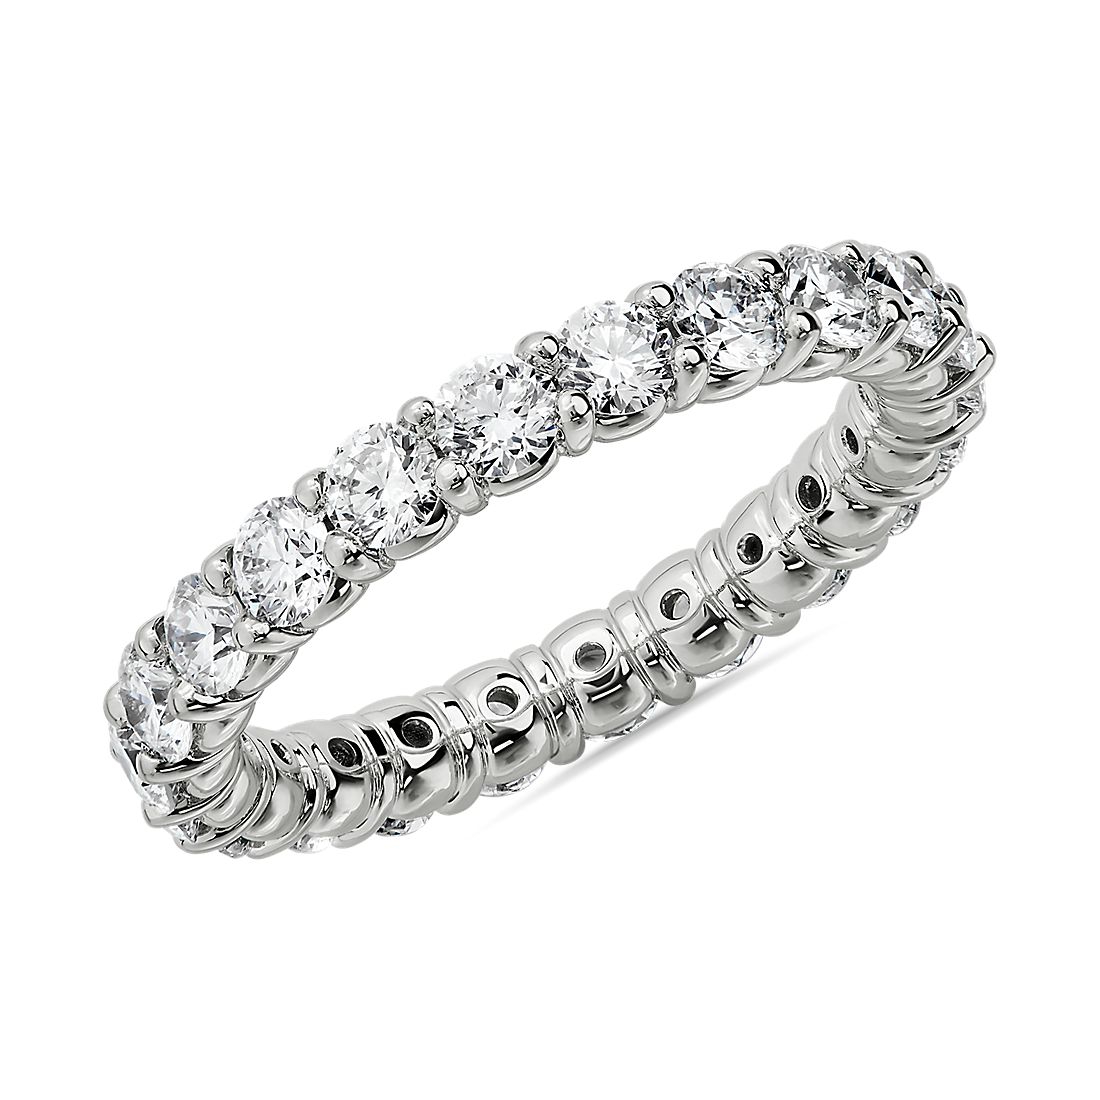 Comfort Fit Round Brilliant Diamond Eternity Ring in 14k White Gold (1.80 ct. tw.)